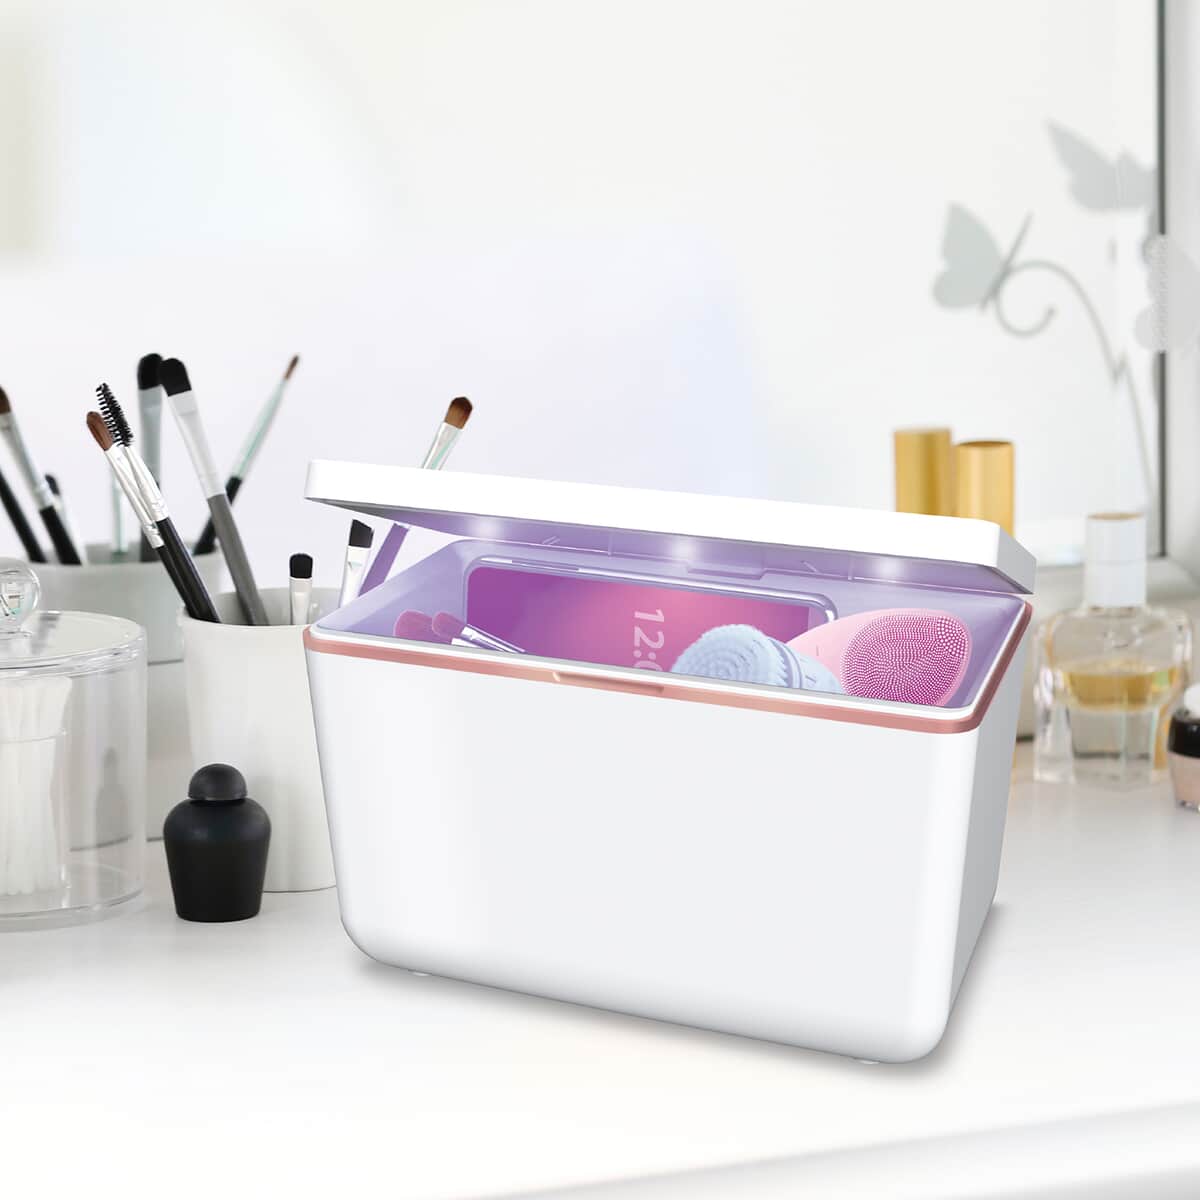 Lomi UV-C Light Self-Cleaning Makeup Box - White image number 1